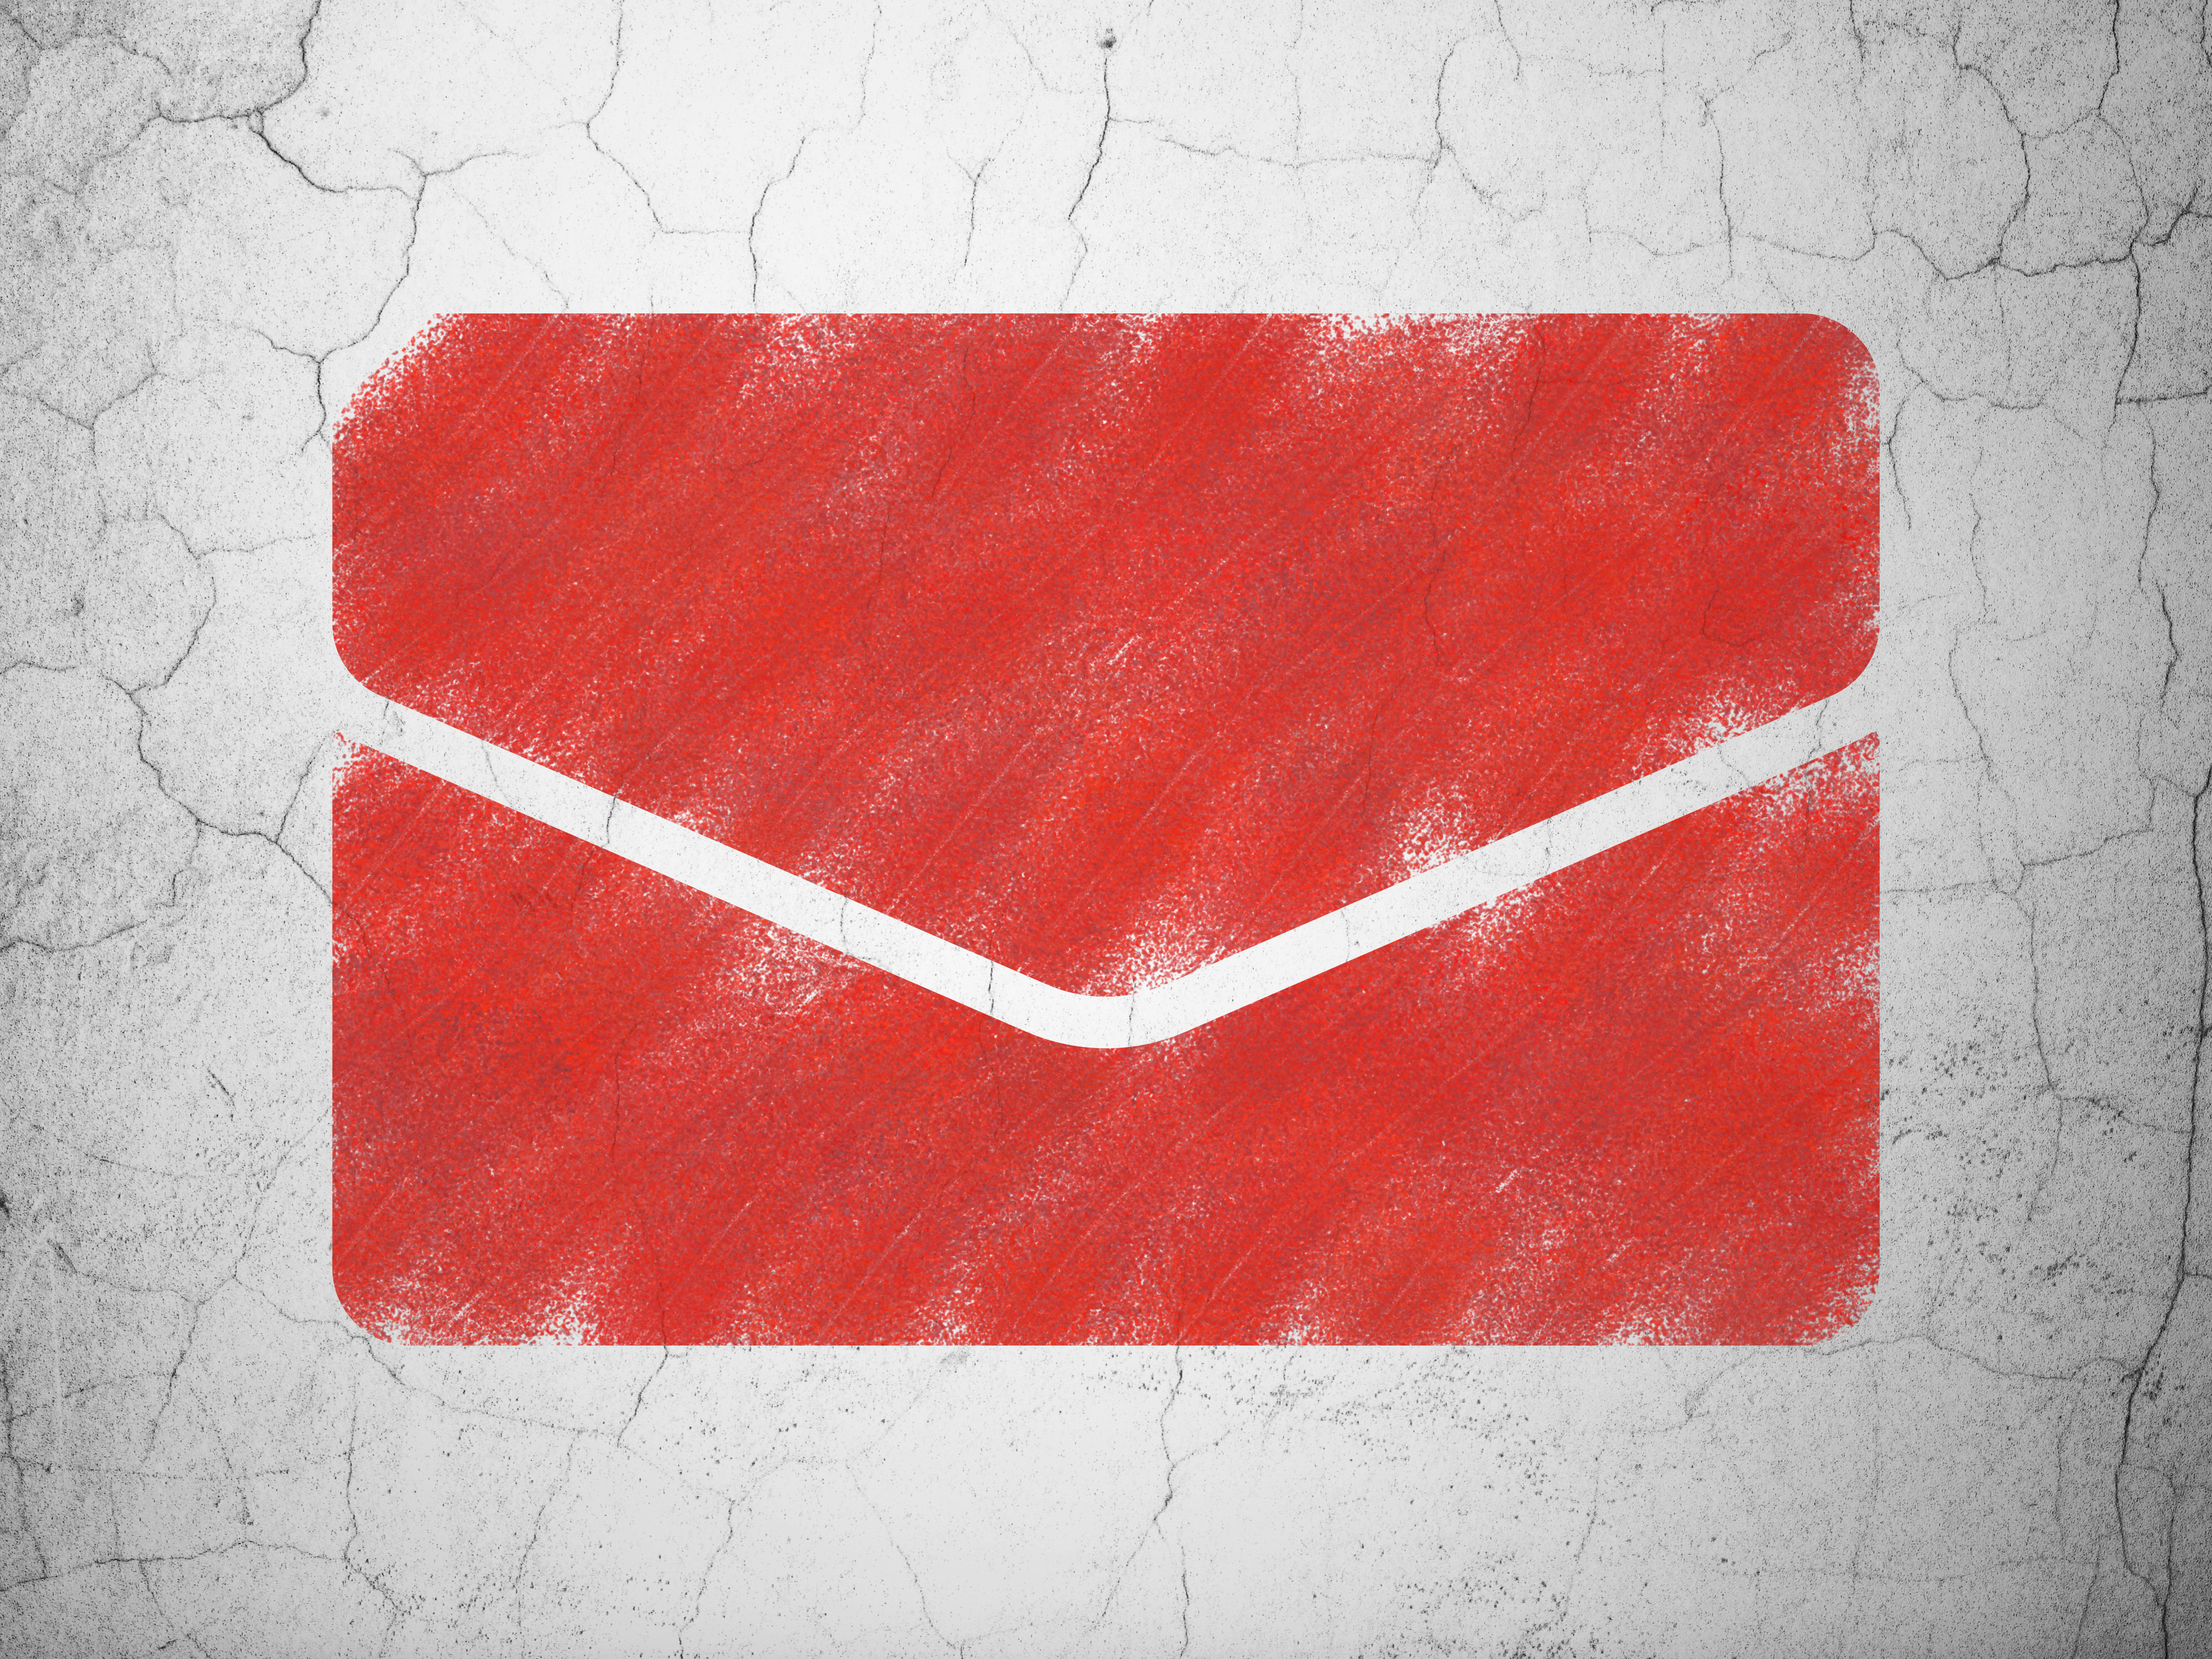 5 Critical Things to Keep In Mind for Your Newsletter